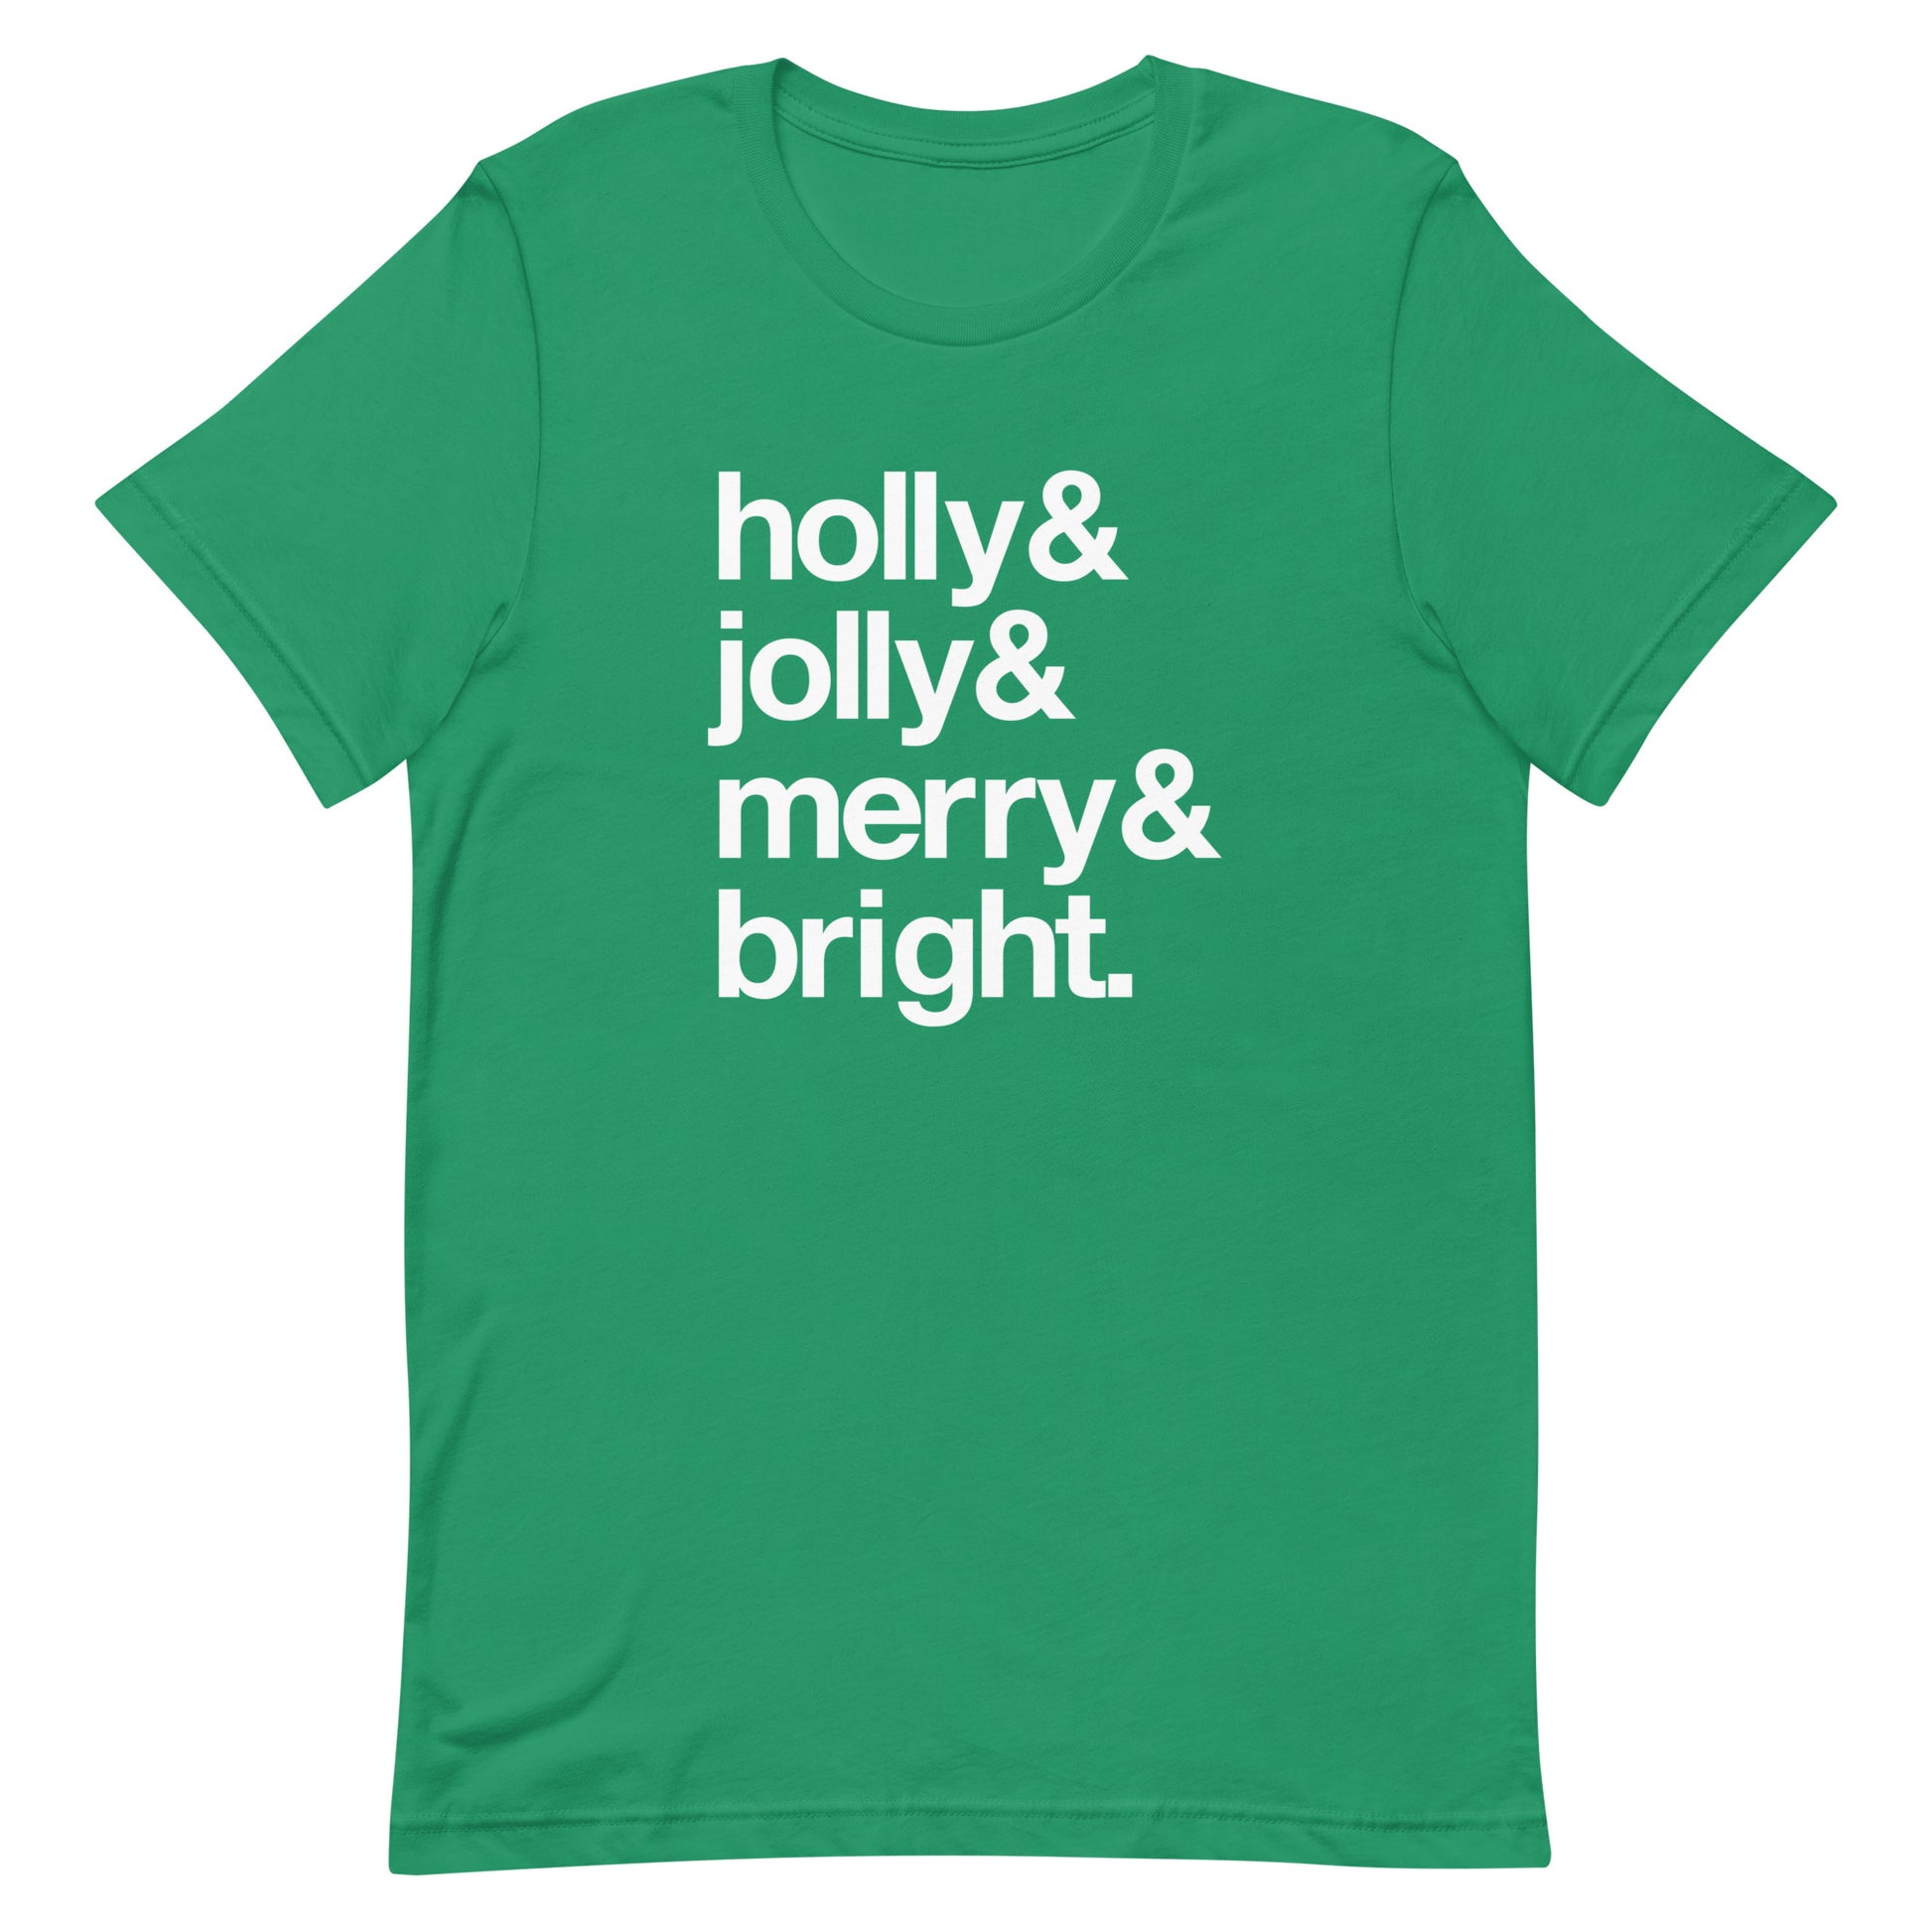 A green crewneck t-shirt with four lines of white text that read "Holly & Jolly & Merry & Bright."